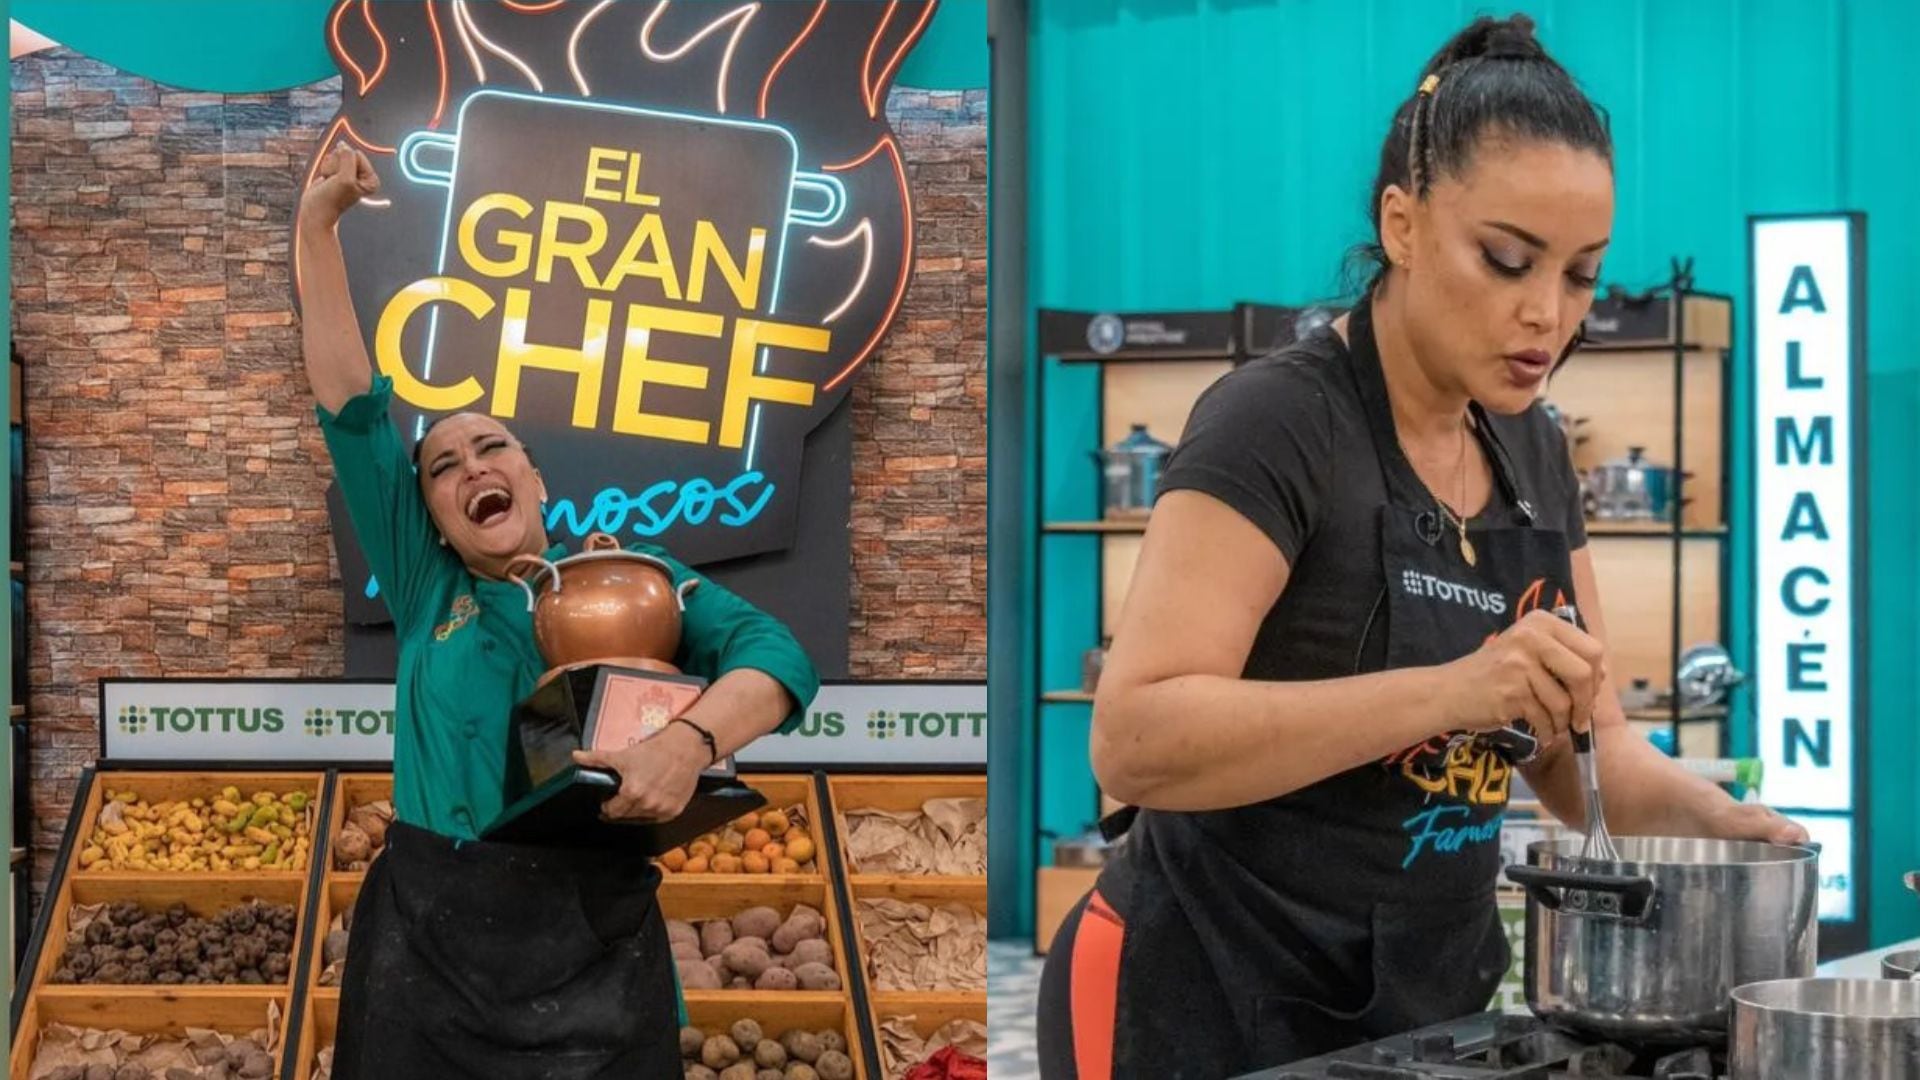 Mariella Zanetti, 47 years old, raised the clay pot of 'The Greatest Celebrity Chef', in its third season.